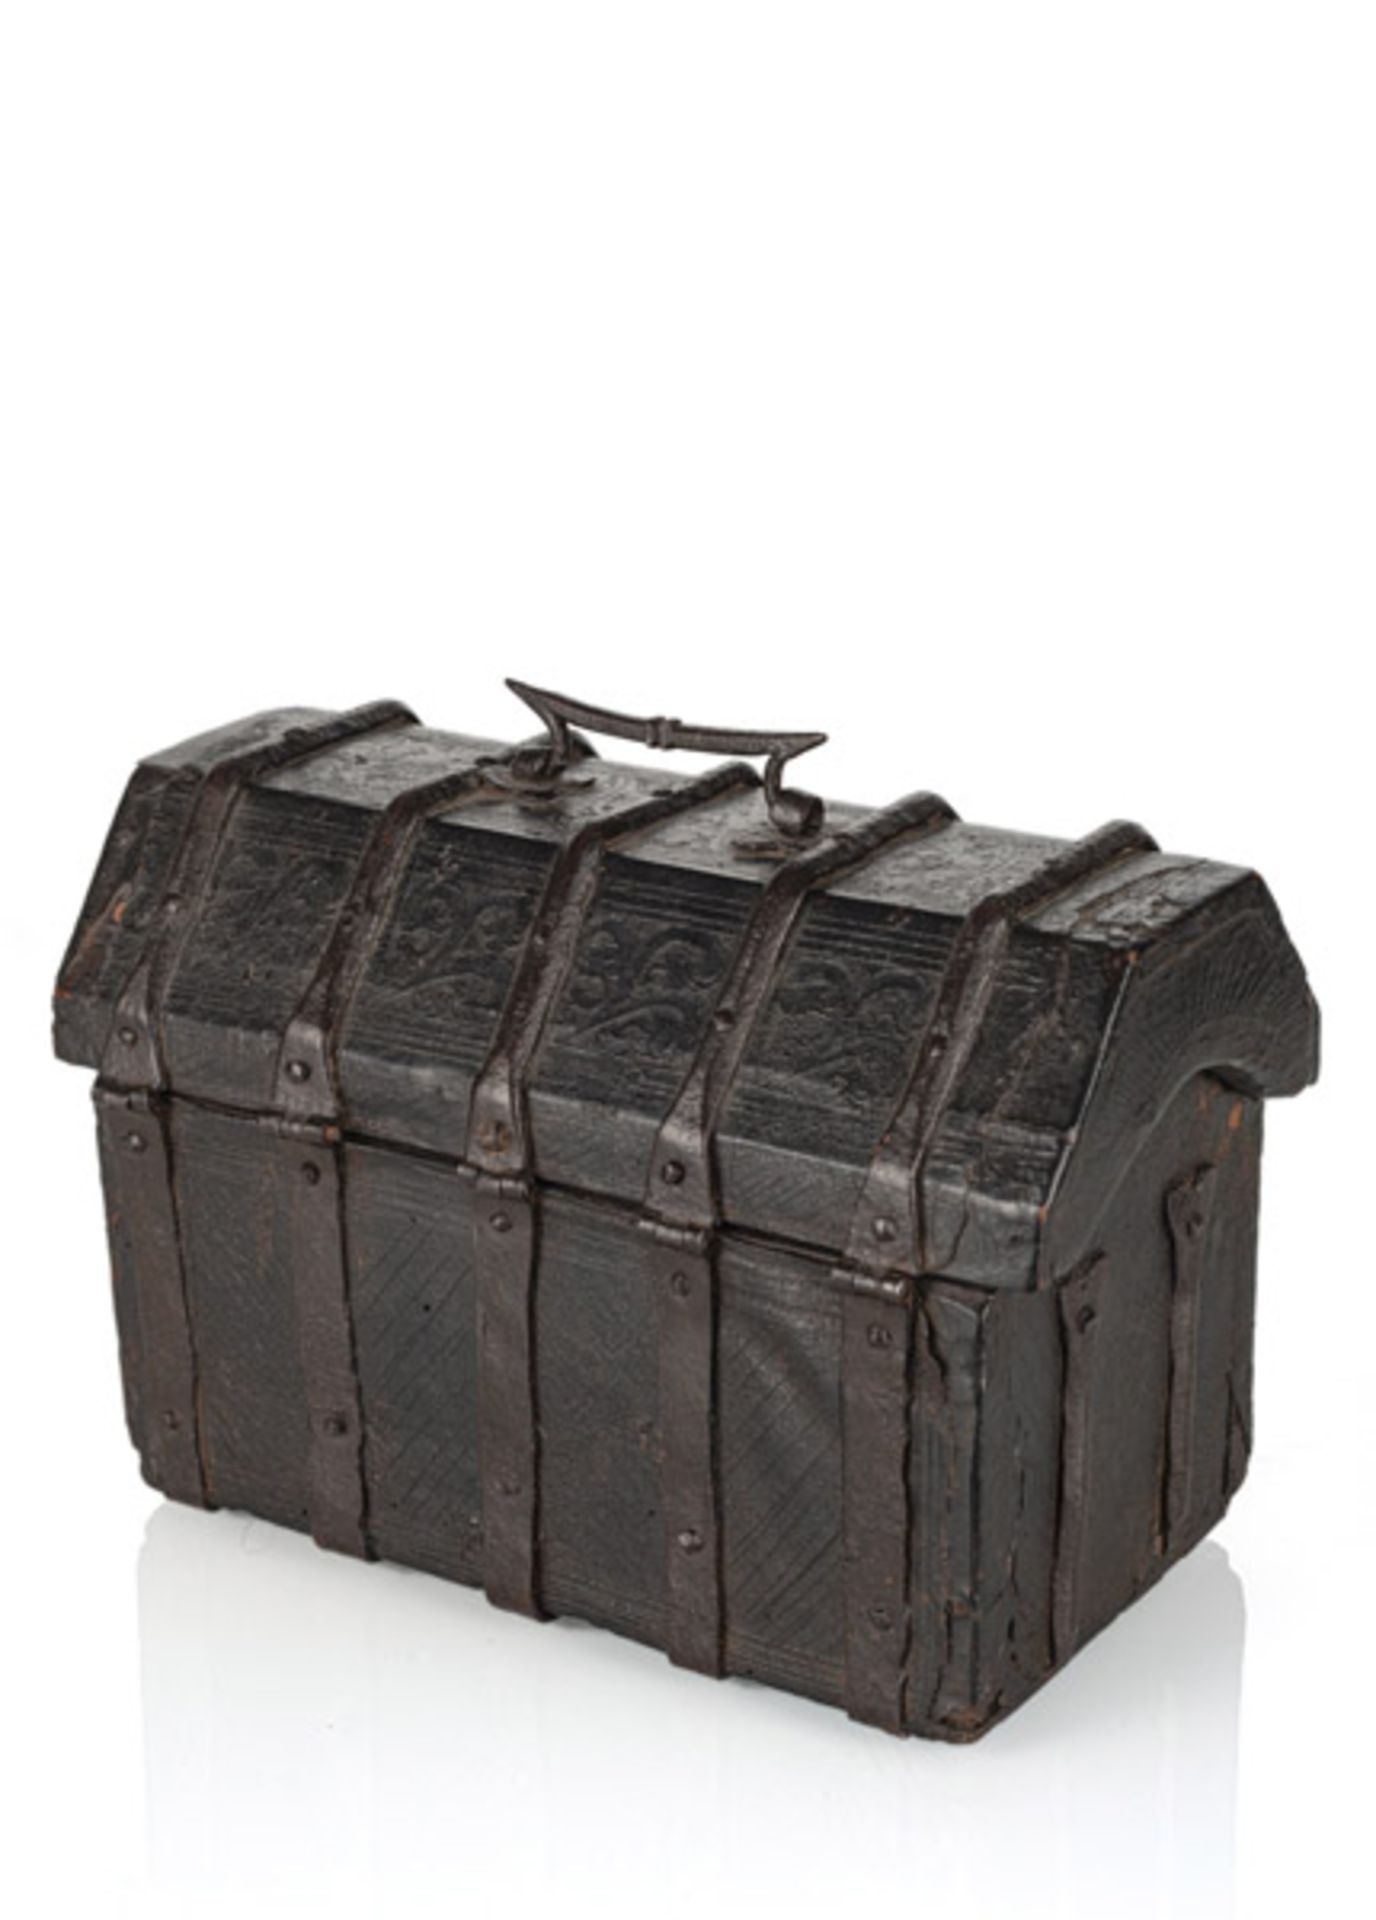 A LATE GOTHIC IRON MOUNTED LEATHER LINED WOOD CASE - Image 3 of 3